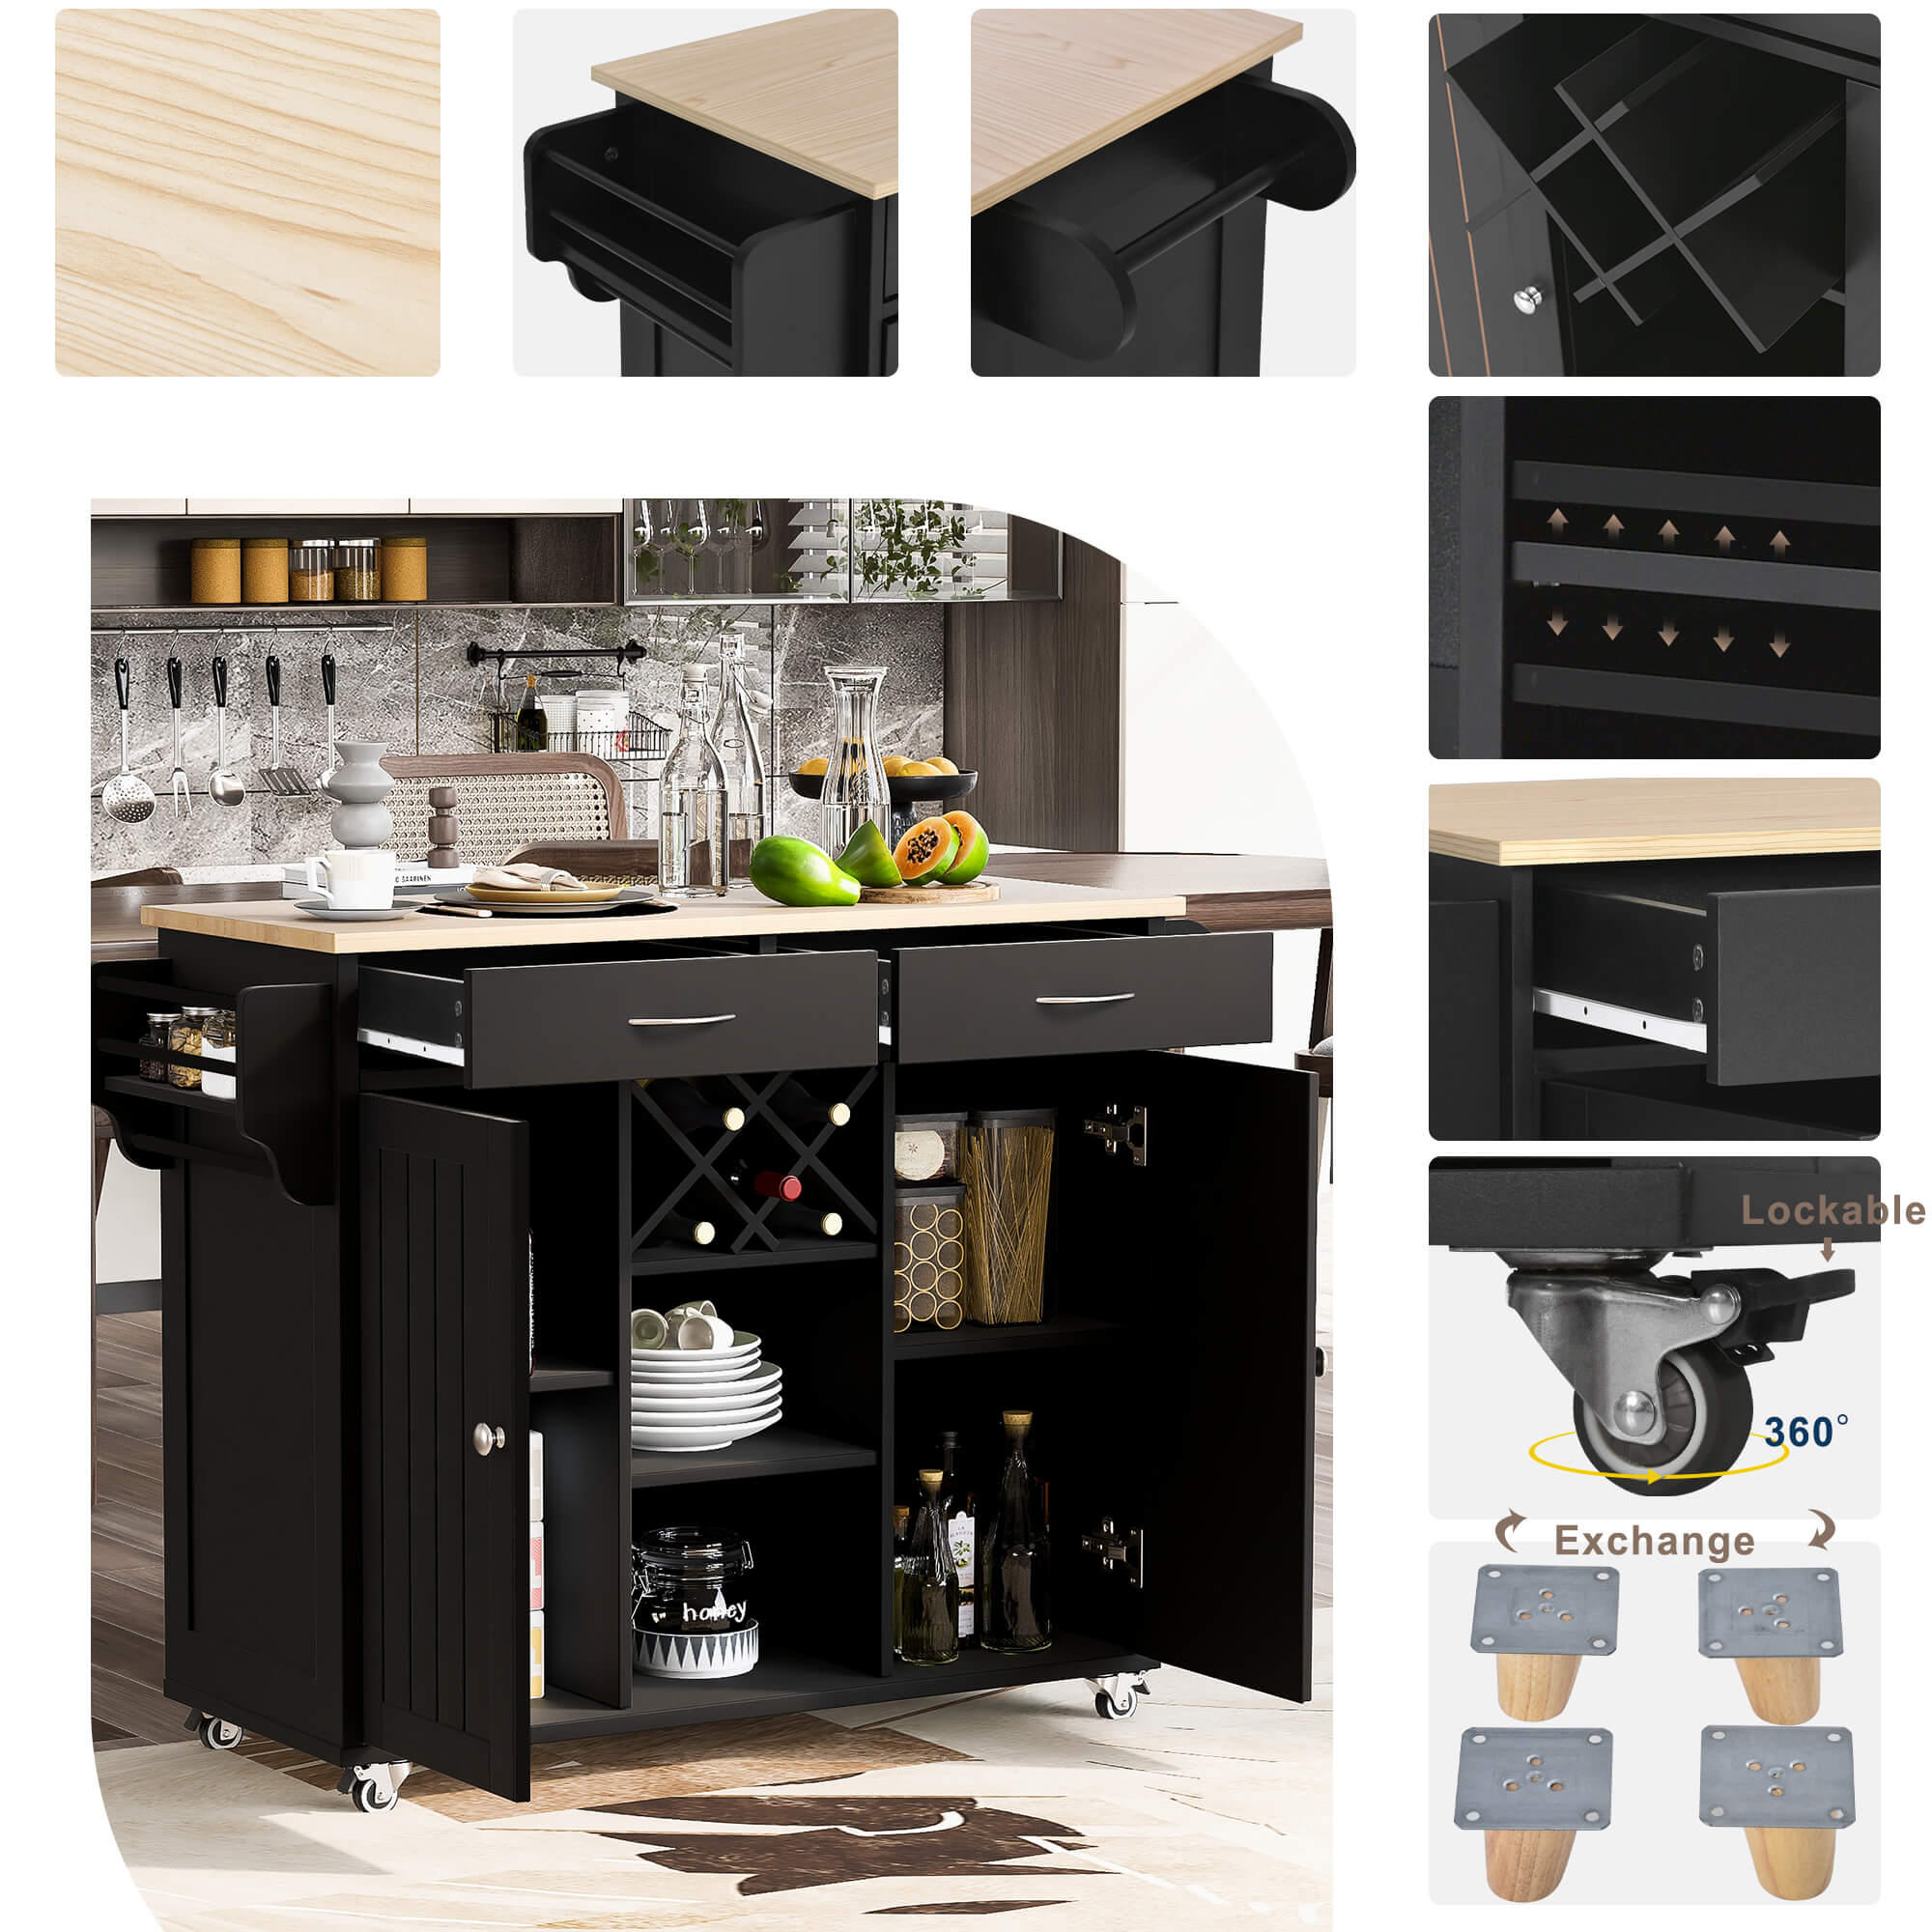 48" Kitchen Island Cart with Locking Wheels, 2 Storage Cabinets, 2 Drawers, Removable Wine Rack, Spice & Towel Rack, Black